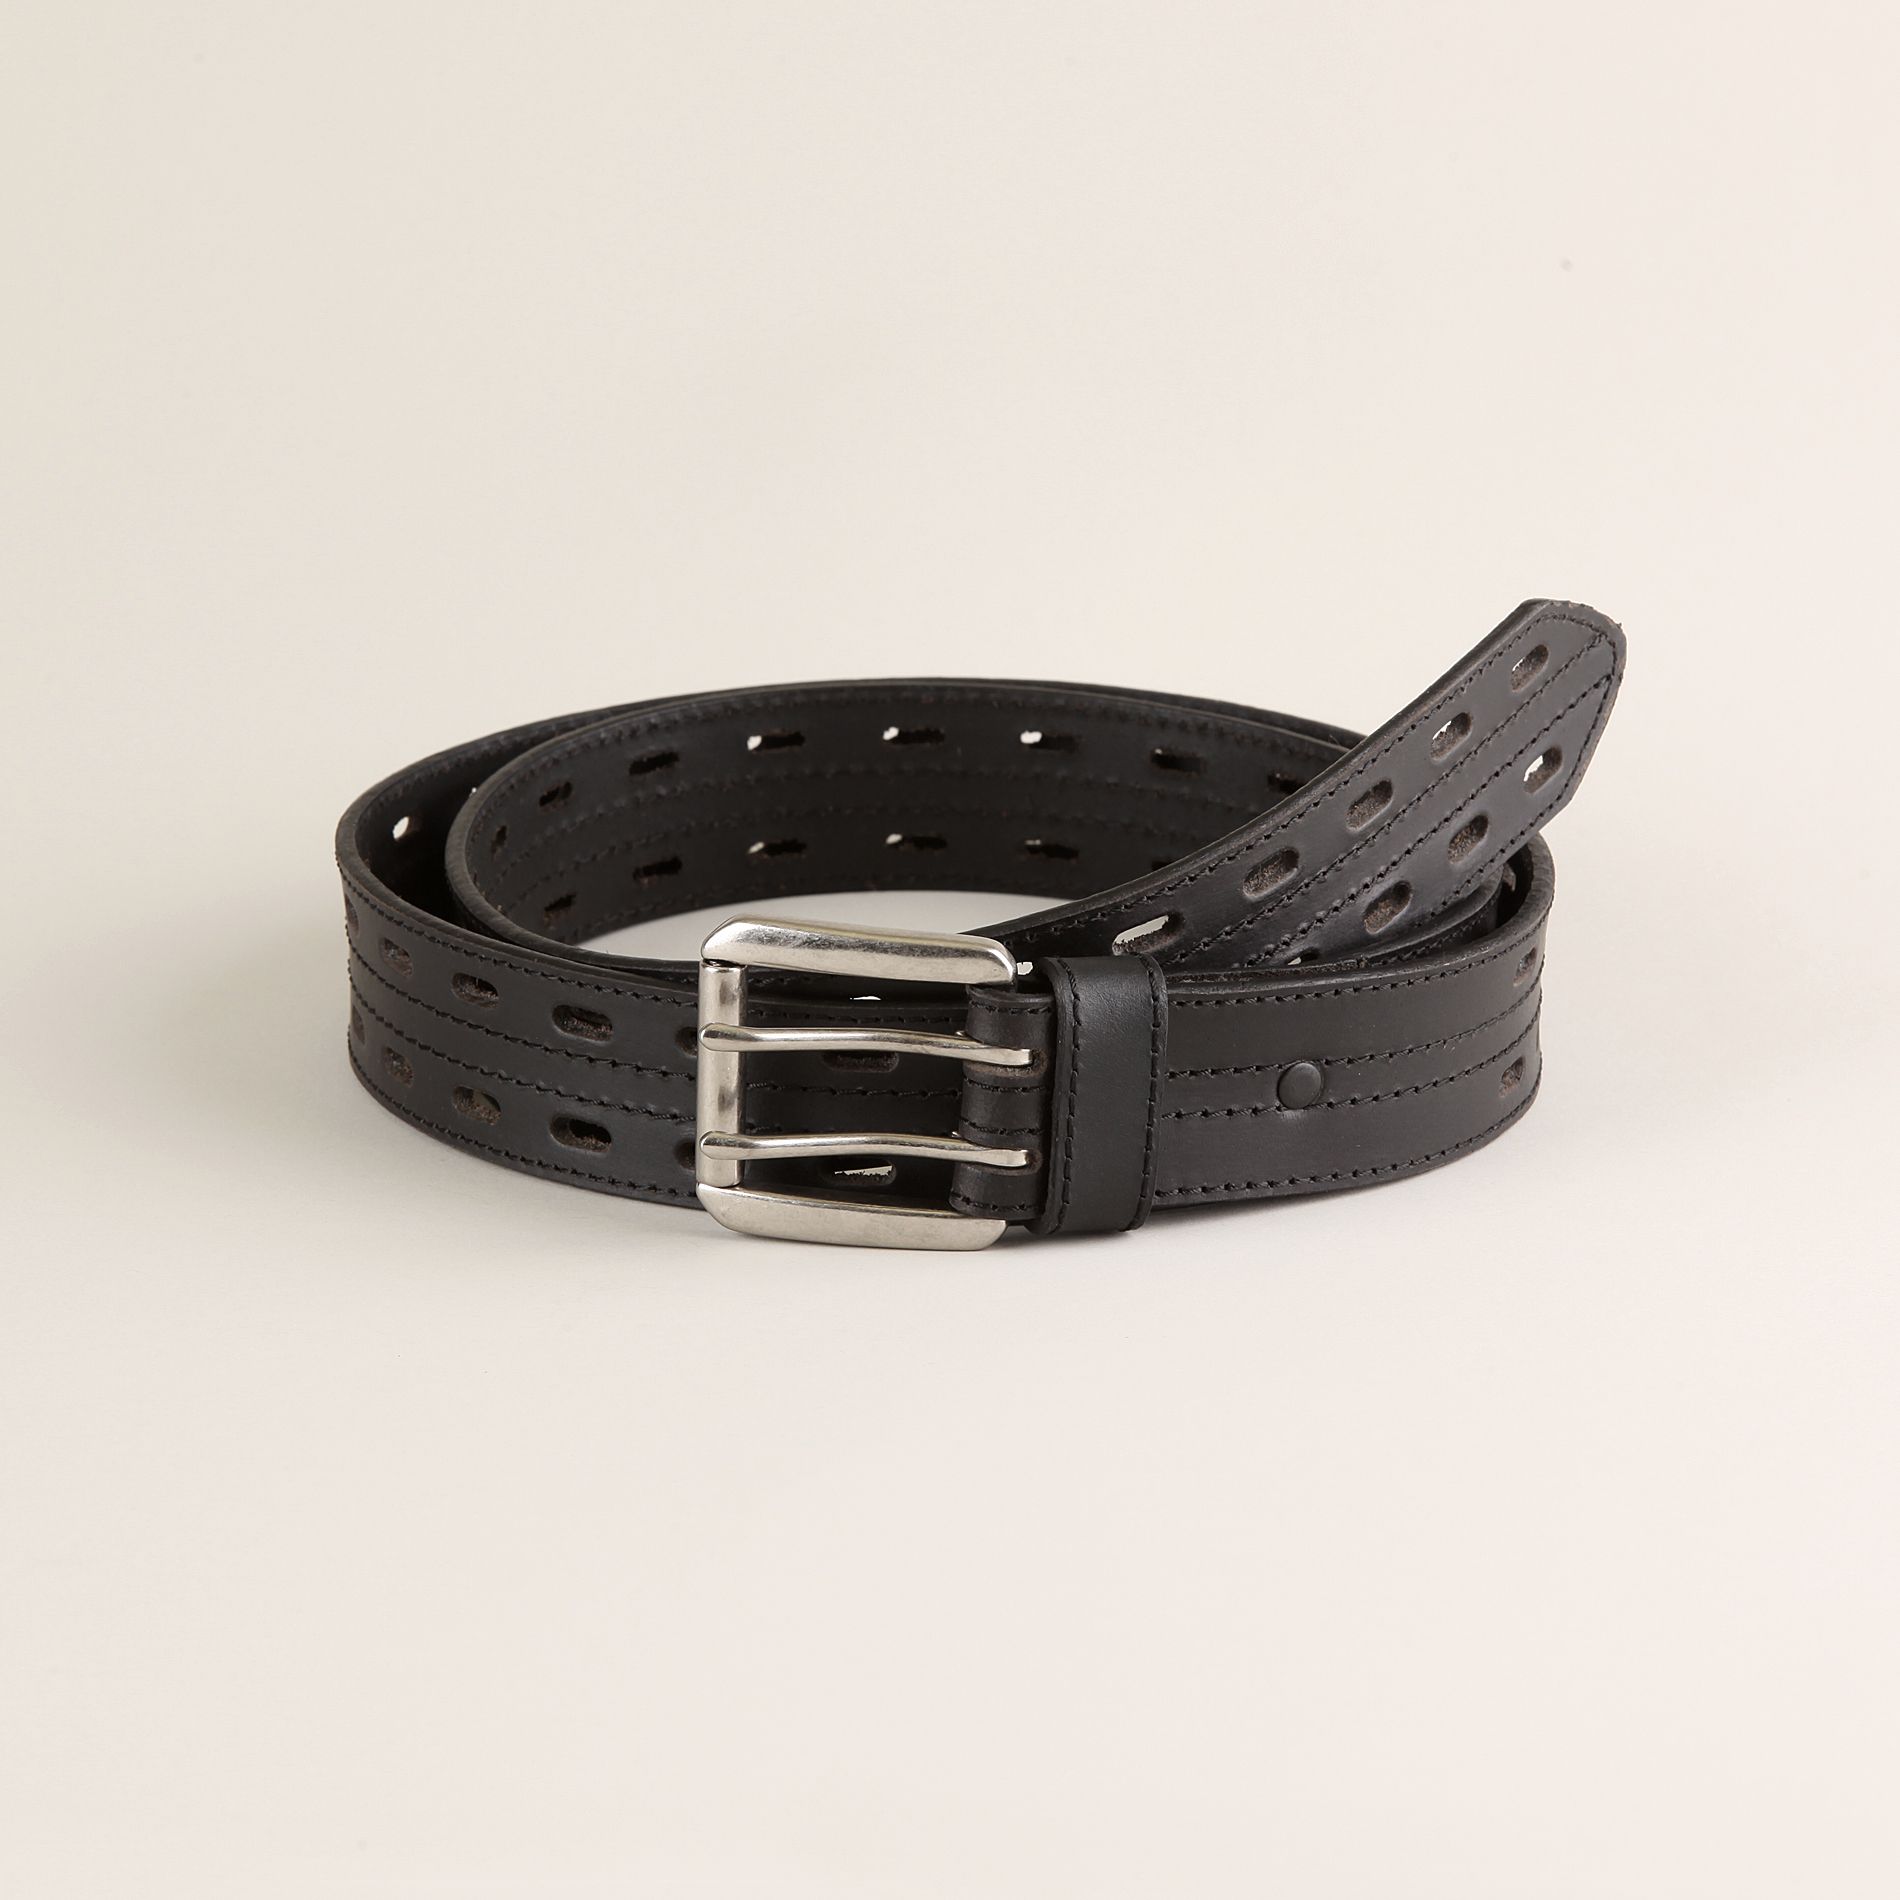 Route 66 Men's Big & Tall Double-Hole Belt